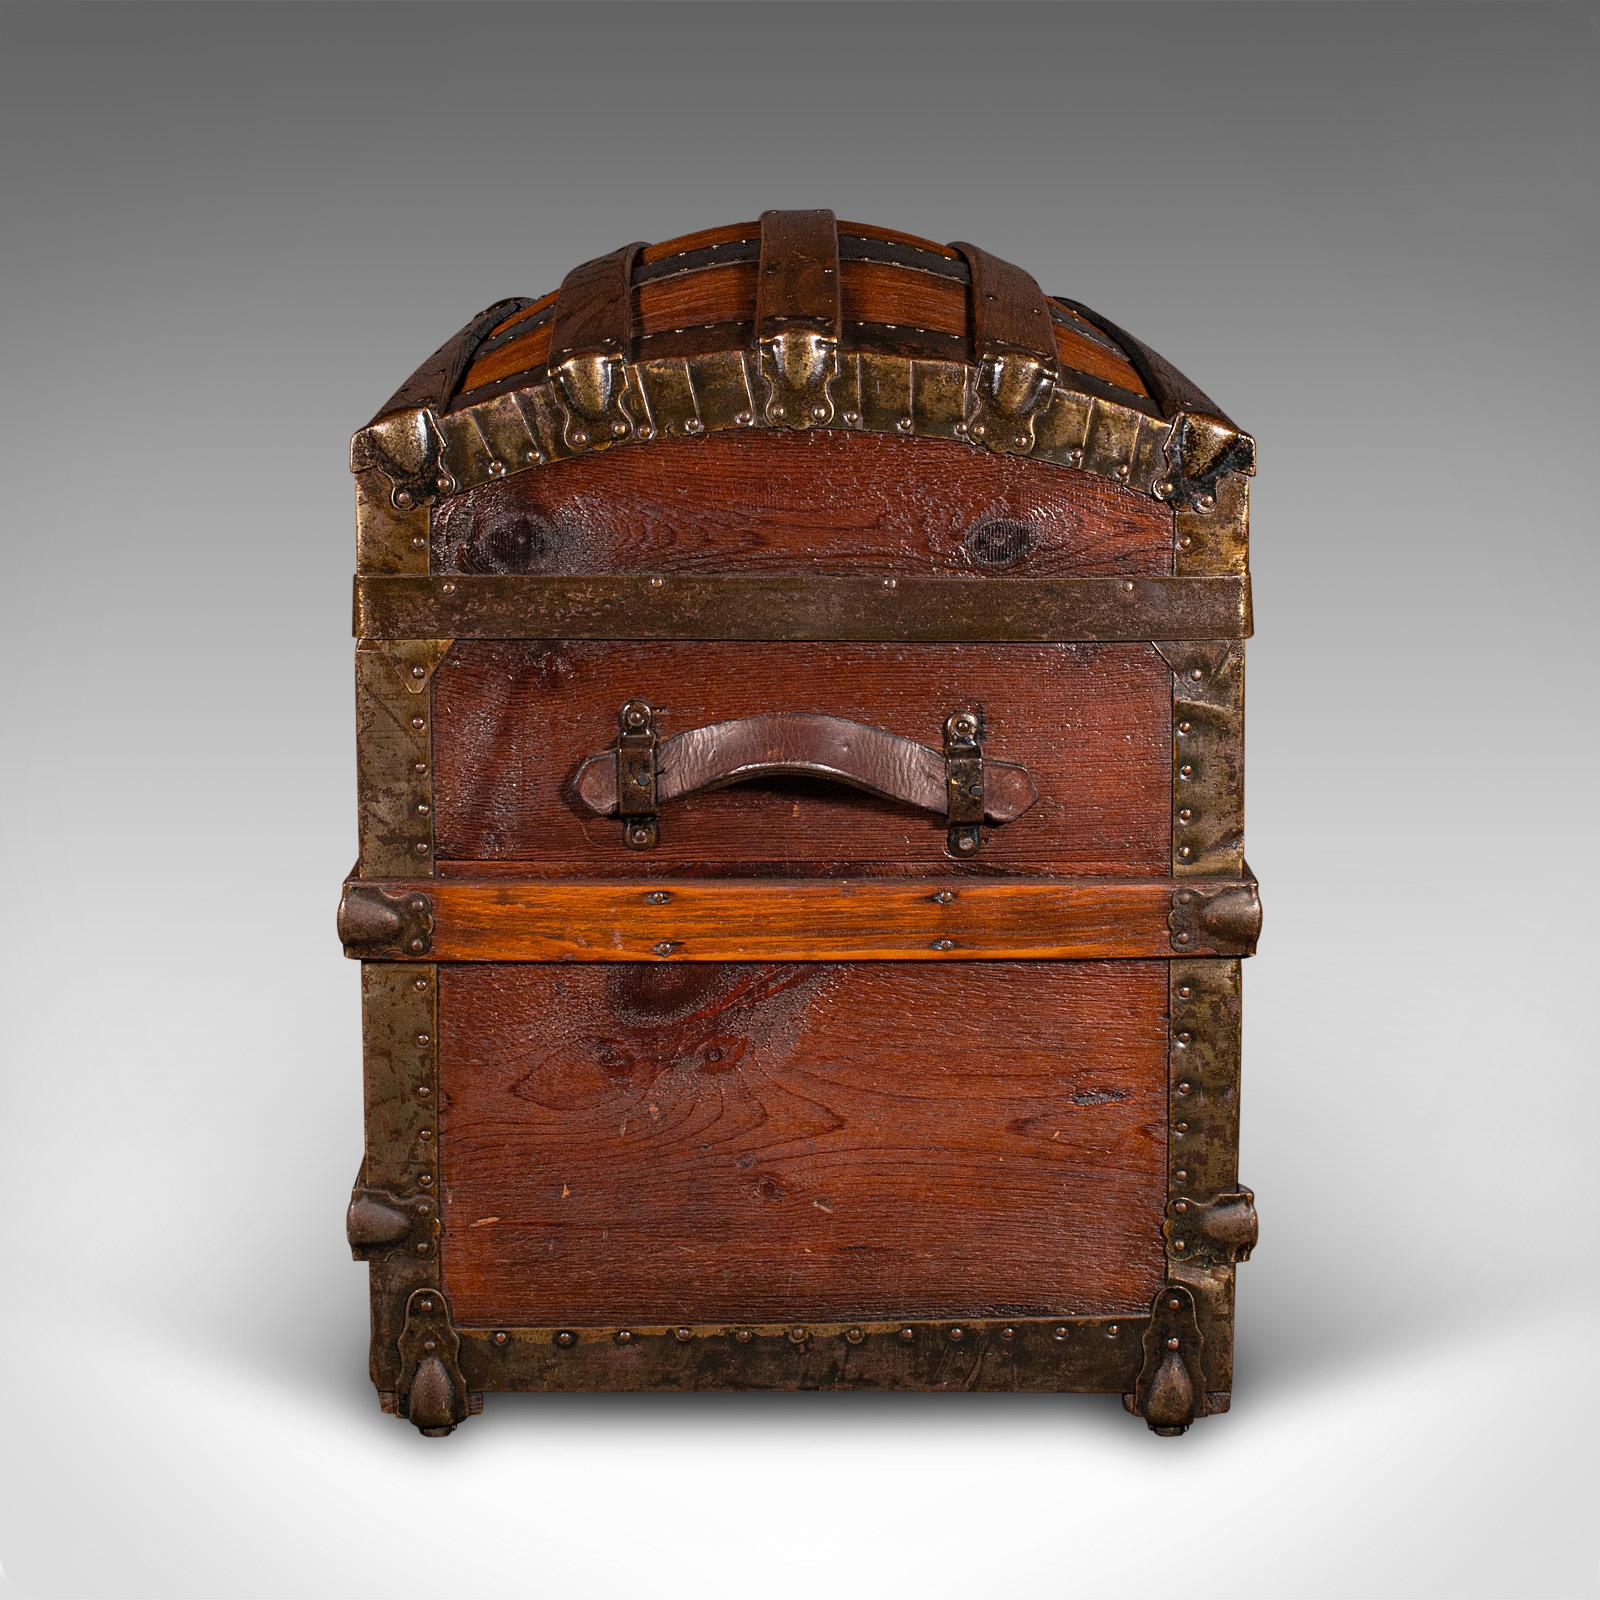 Iron Antique Dome Topped Chest, English, Pine, Shipping Trunk, Victorian, Circa 1870